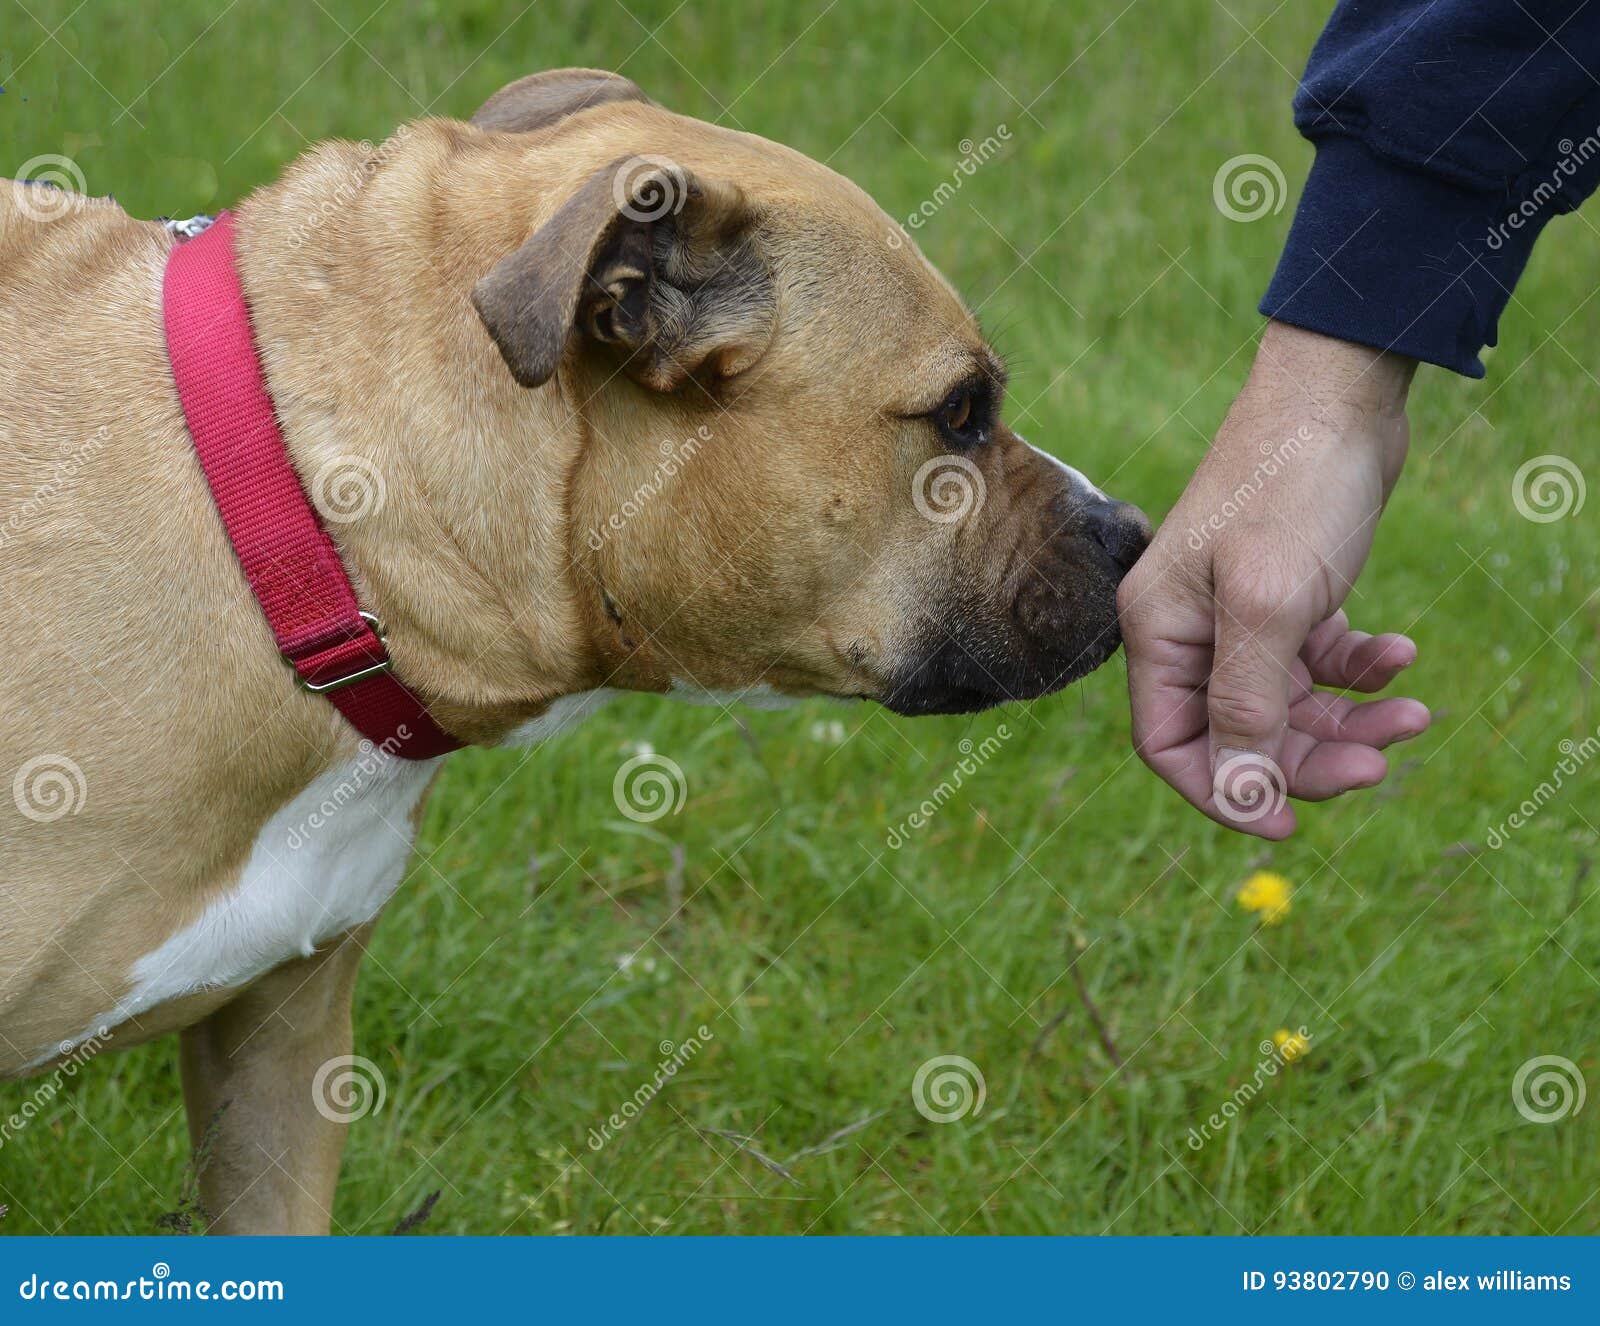 dog sniffing a persons hand